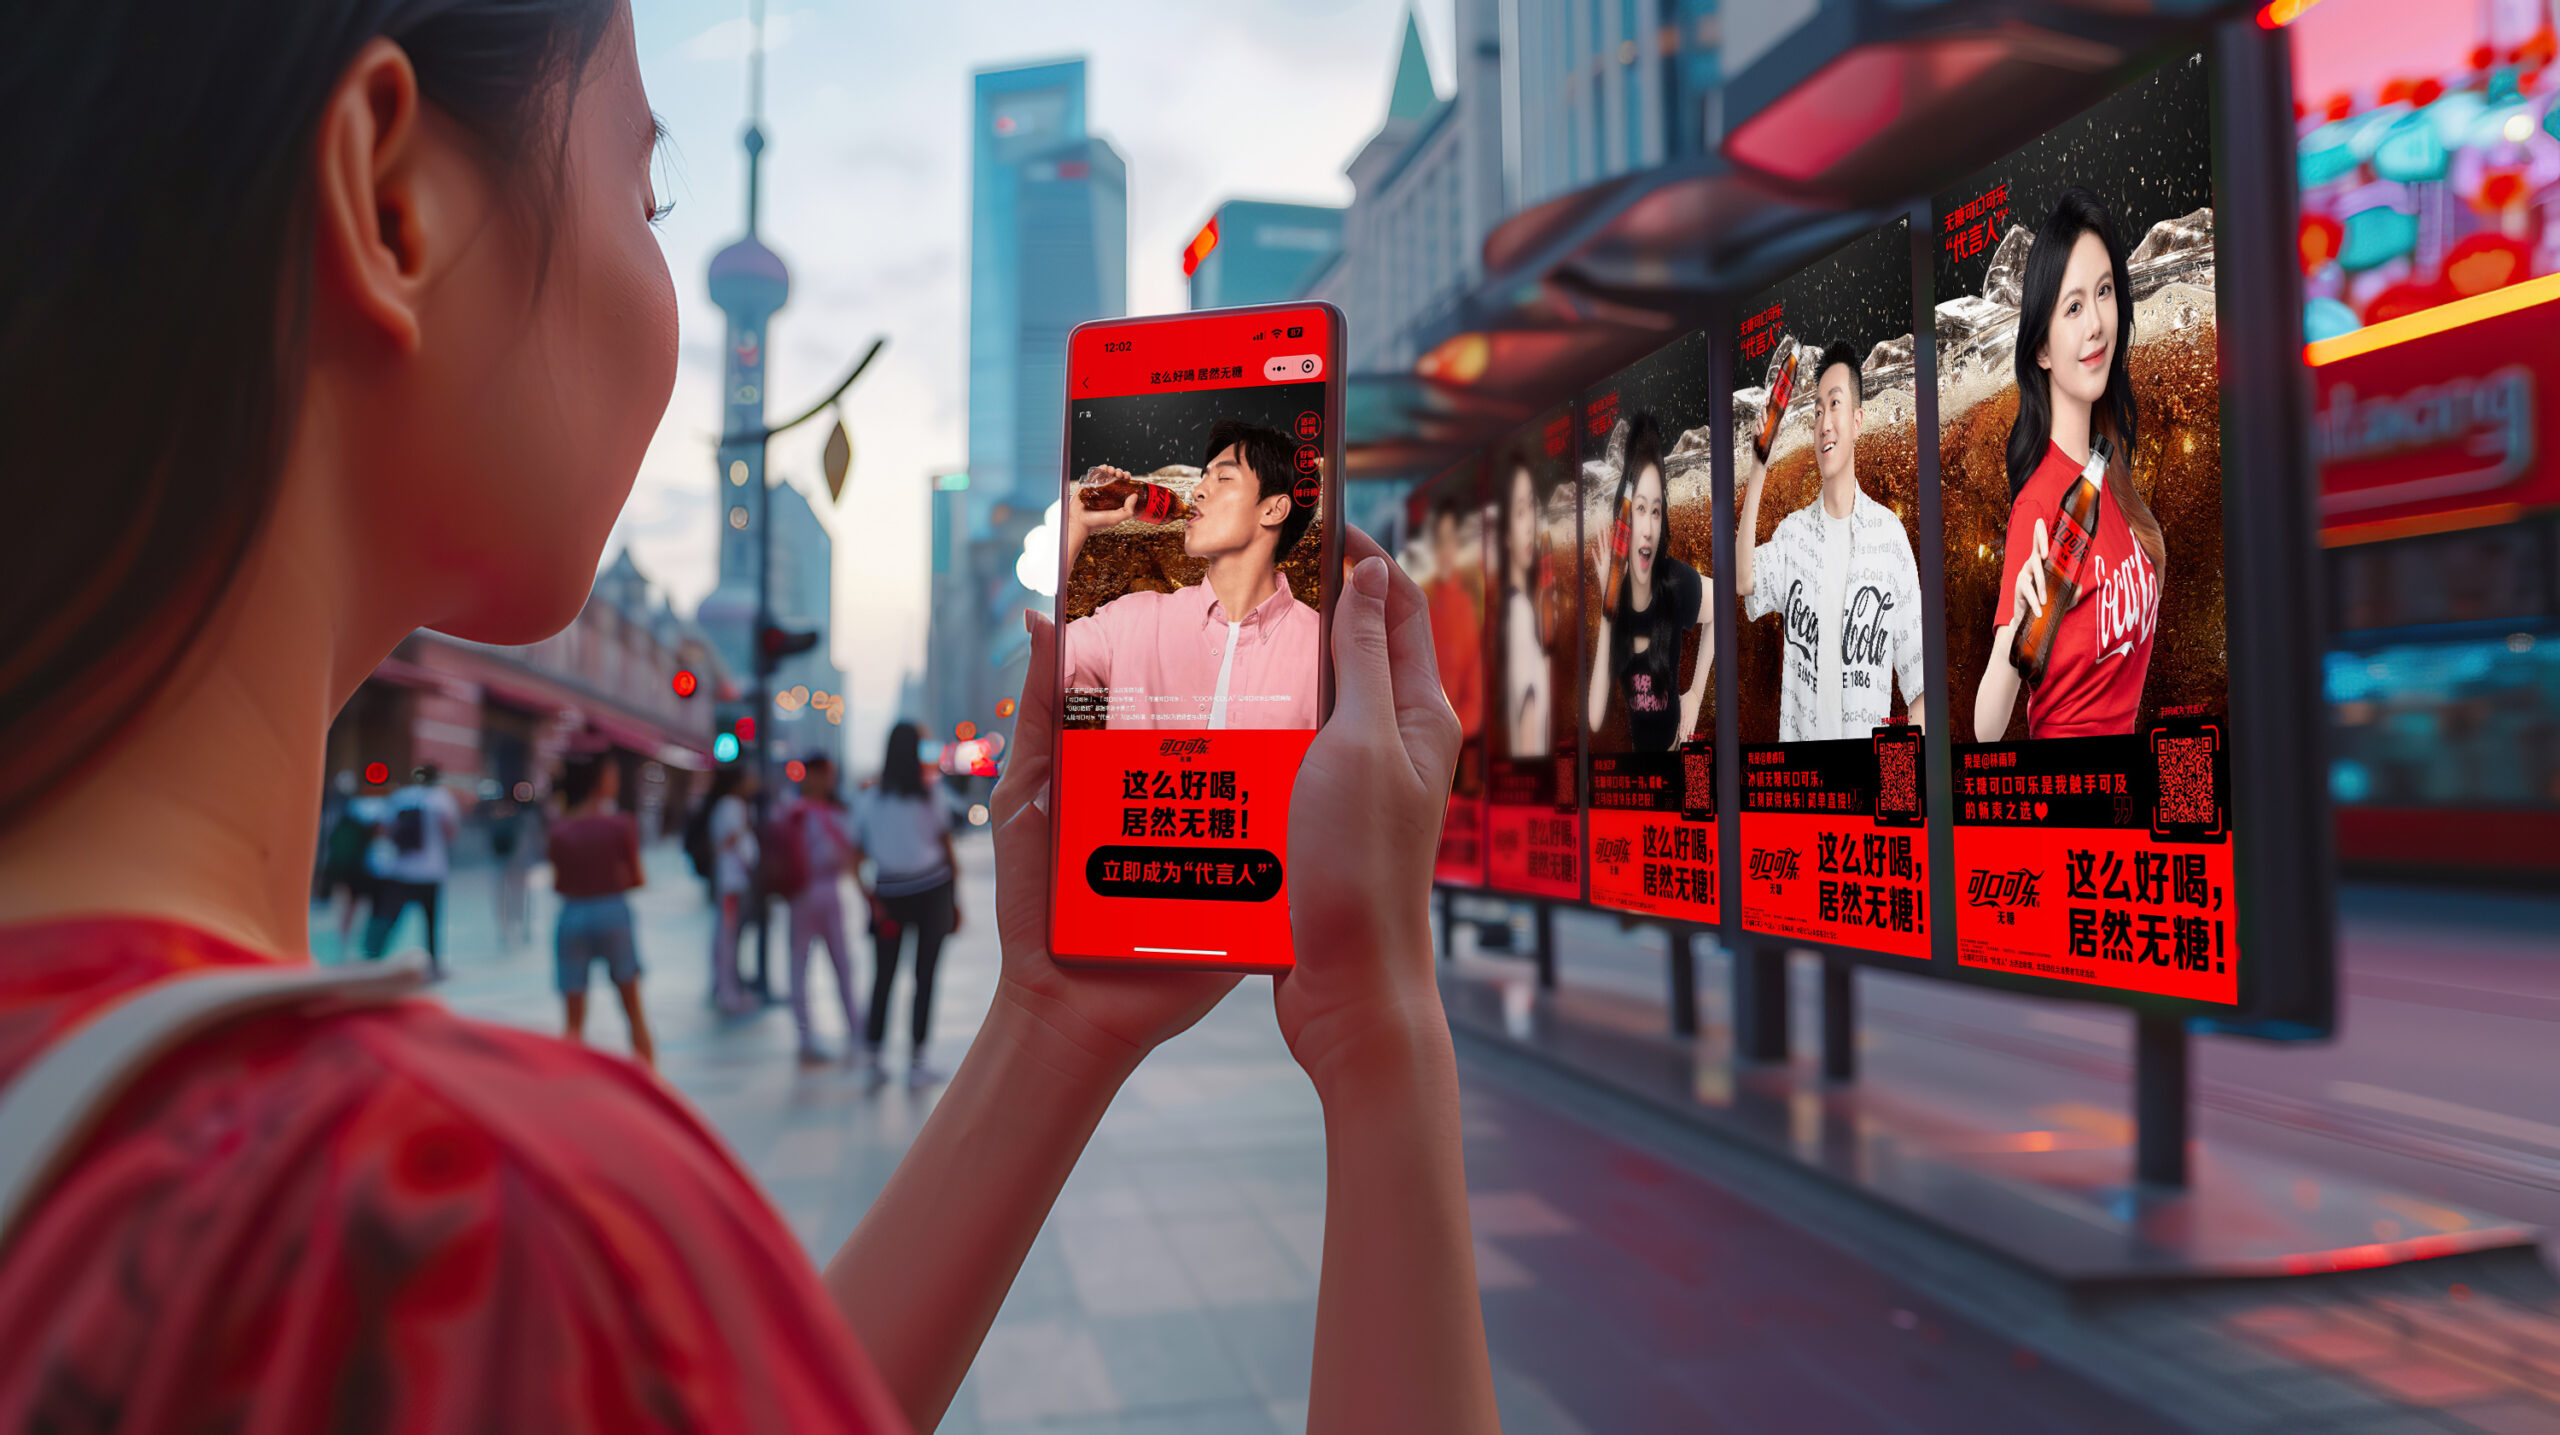 Coca-Cola invites you to be its ambassador on AI posters